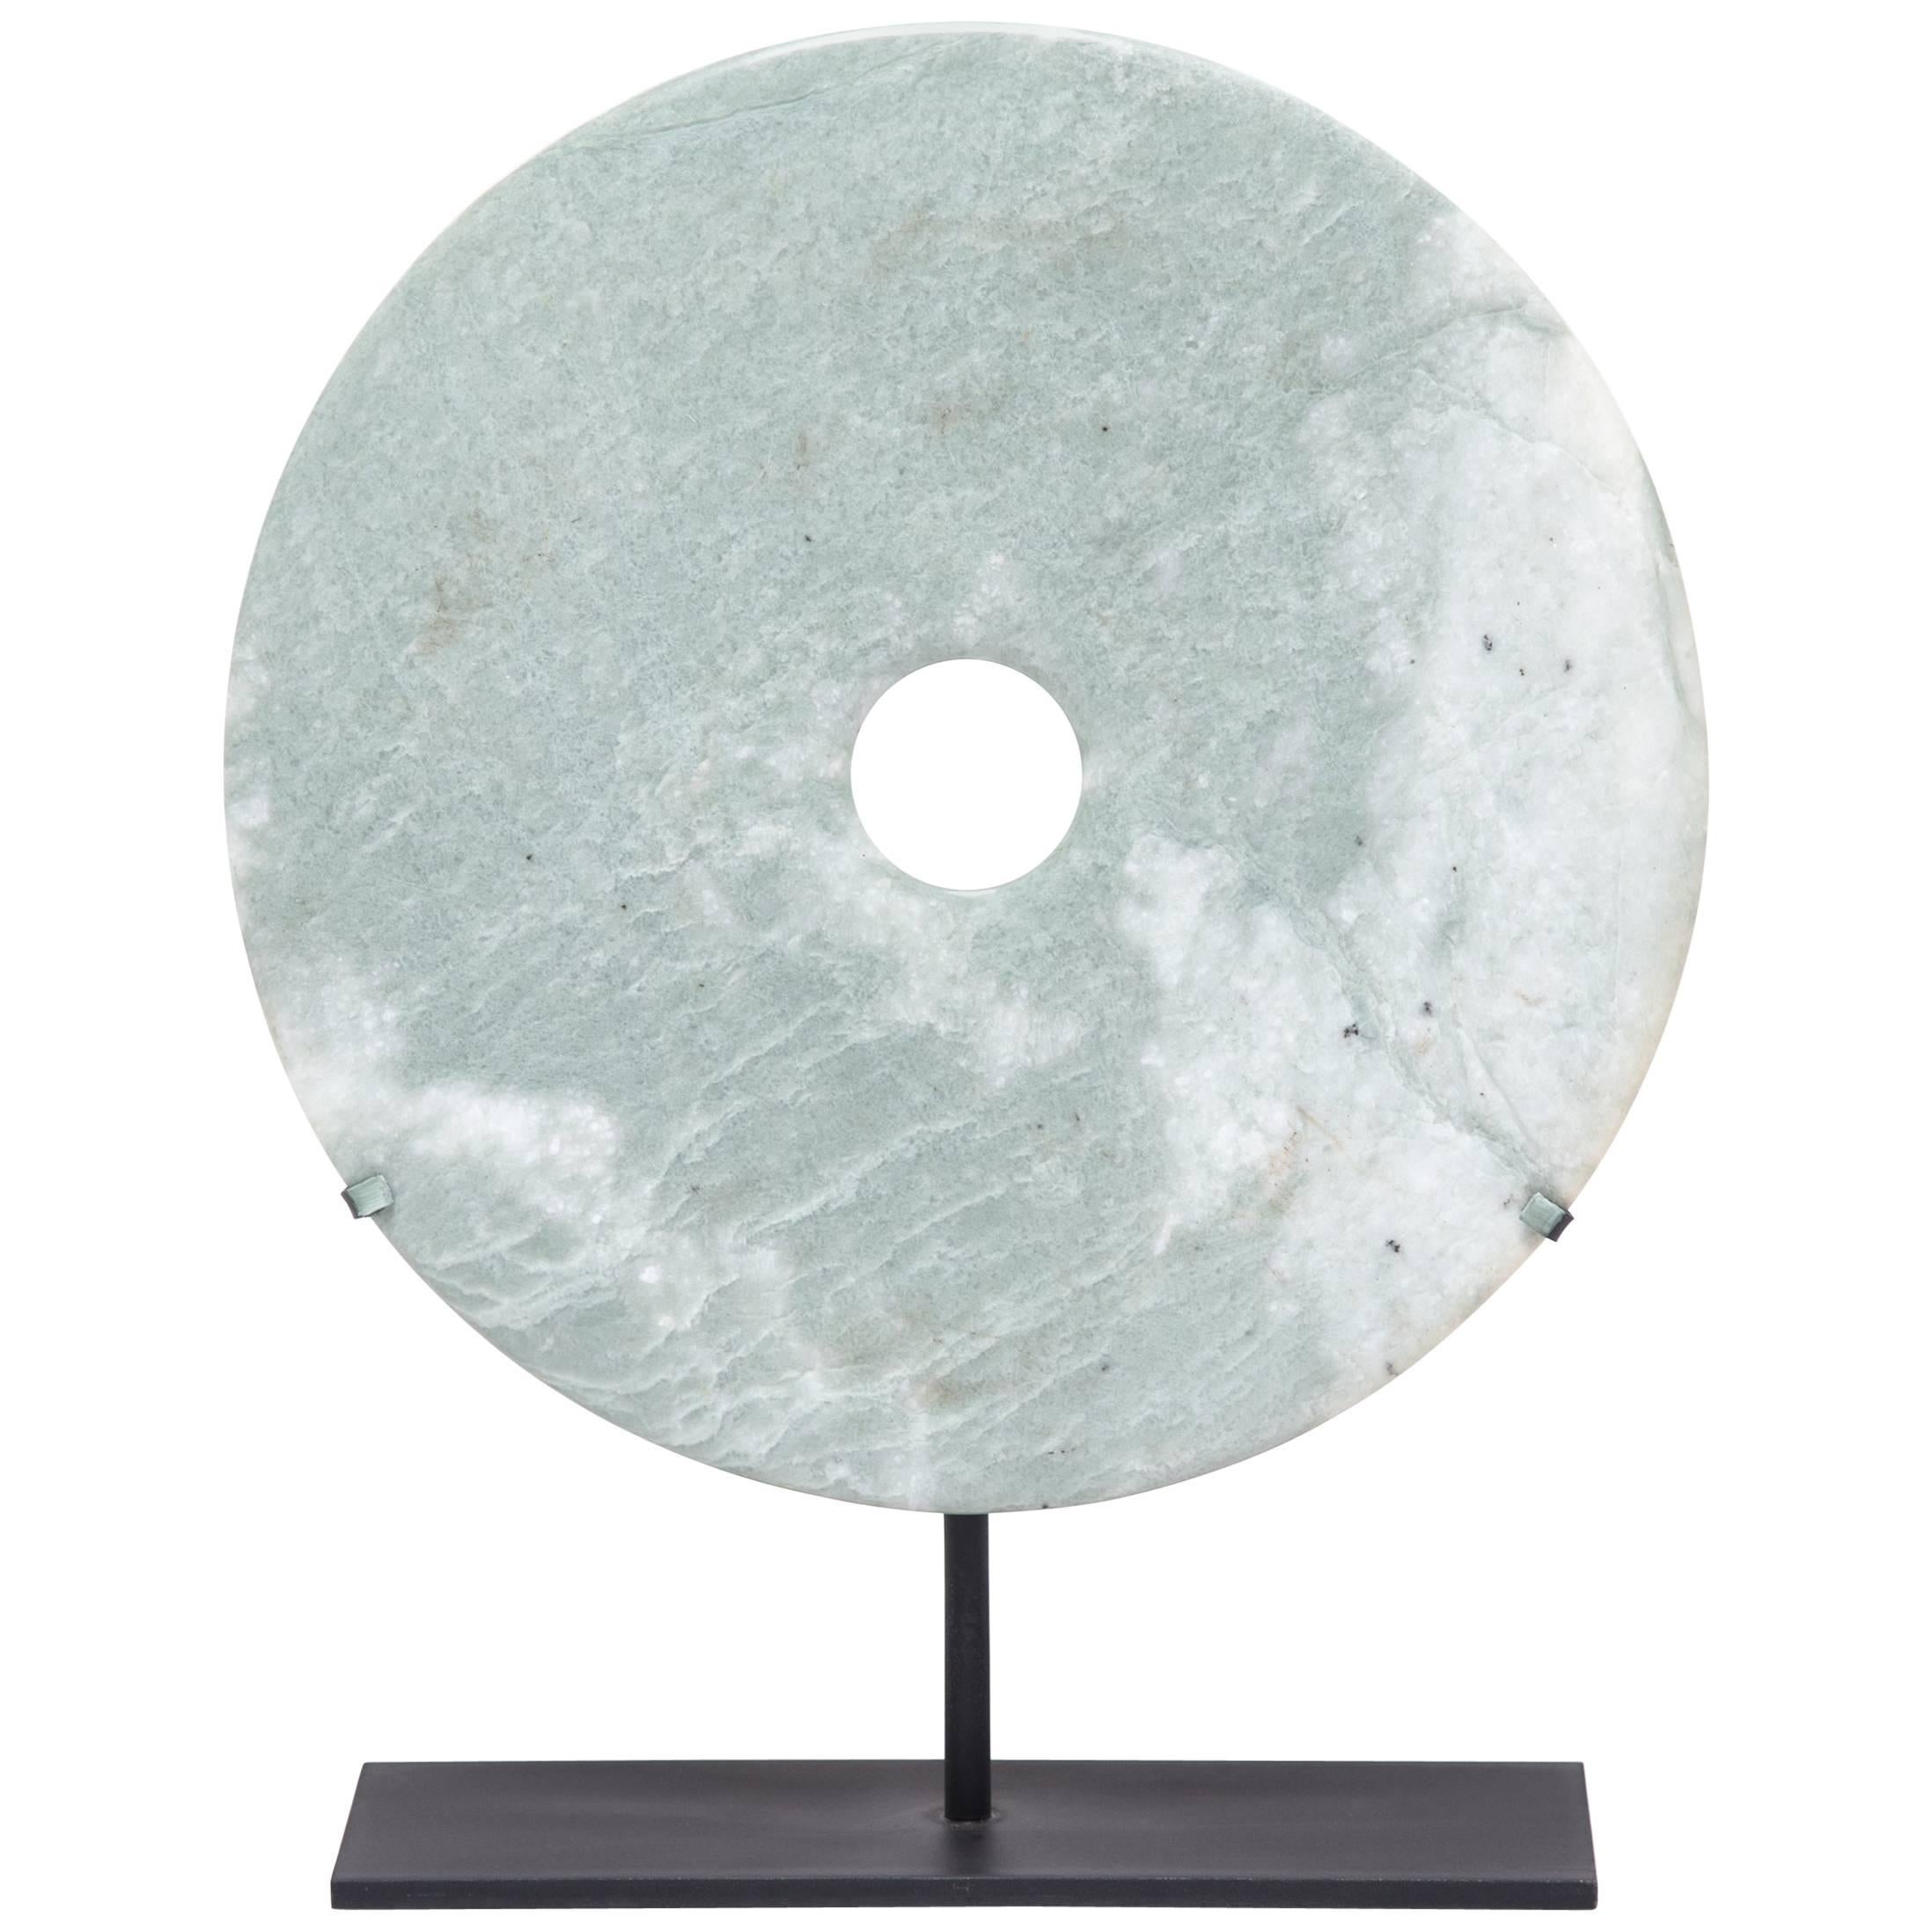 Found in the tombs of ancient Chinese emperors and aristocrats, bi discs such as this have a mysterious and spiritual history, and their function and significance remain uncertain. Thought to provide a conduit to the heavenly realm, bi discs are